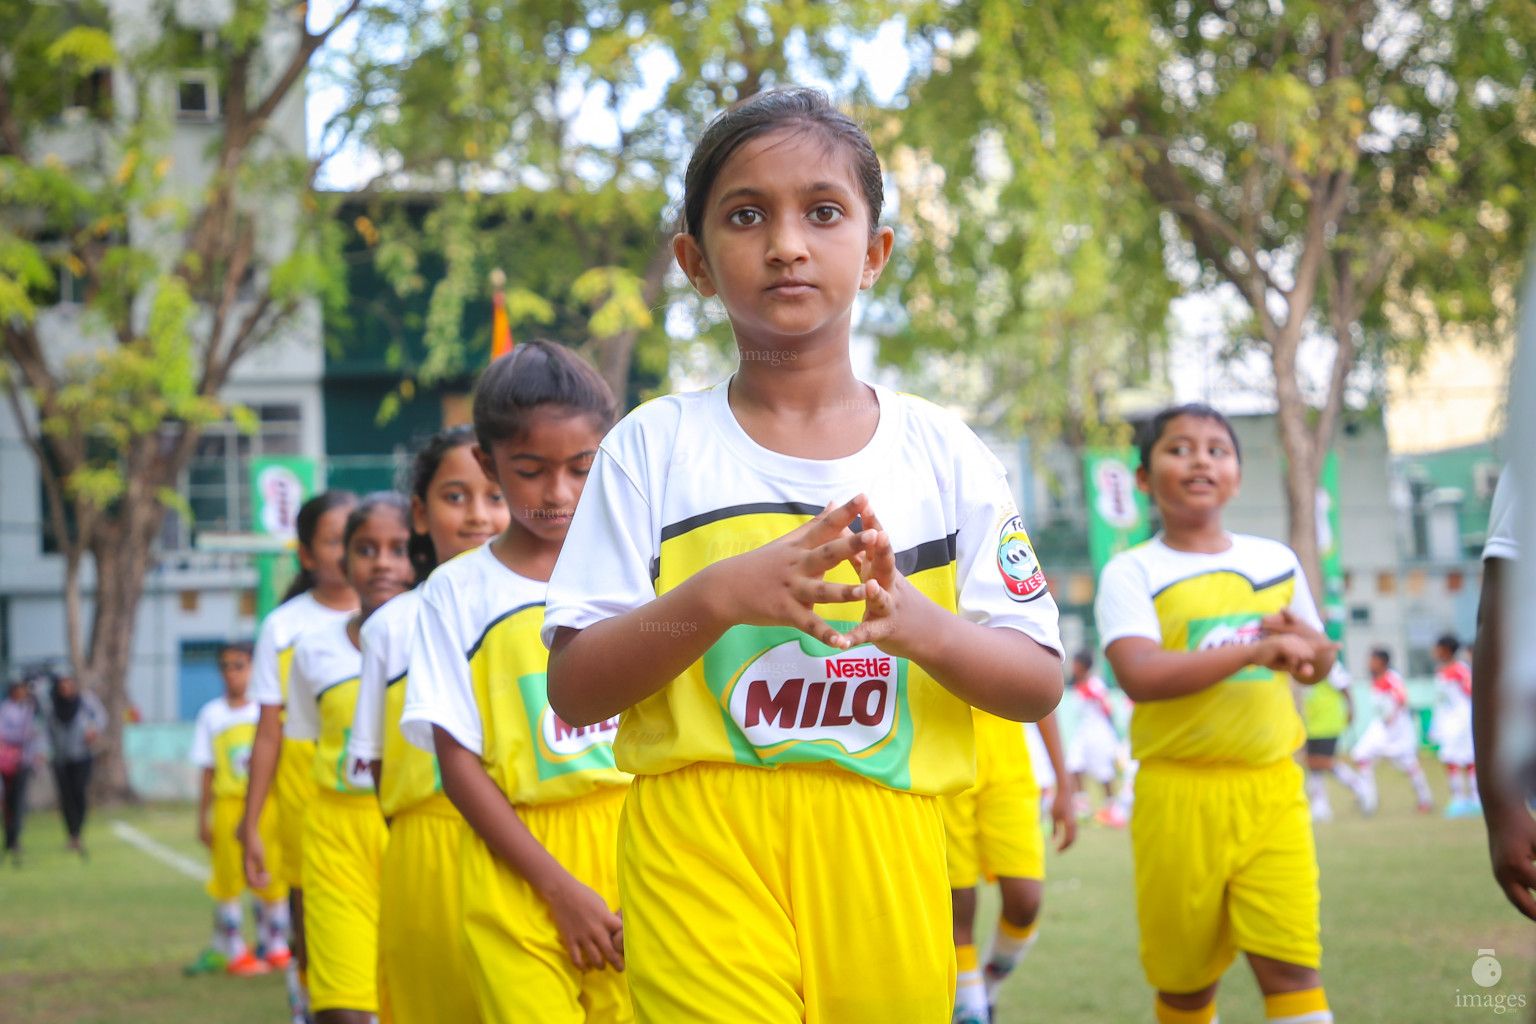 Opening Ceremony of Milo Kids Football Fiesta in Henveiru Grounds in Male', Maldives, Wednesday, Fe20uary 19th 2019 (Images.mv Photo/Ismail Thoriq)